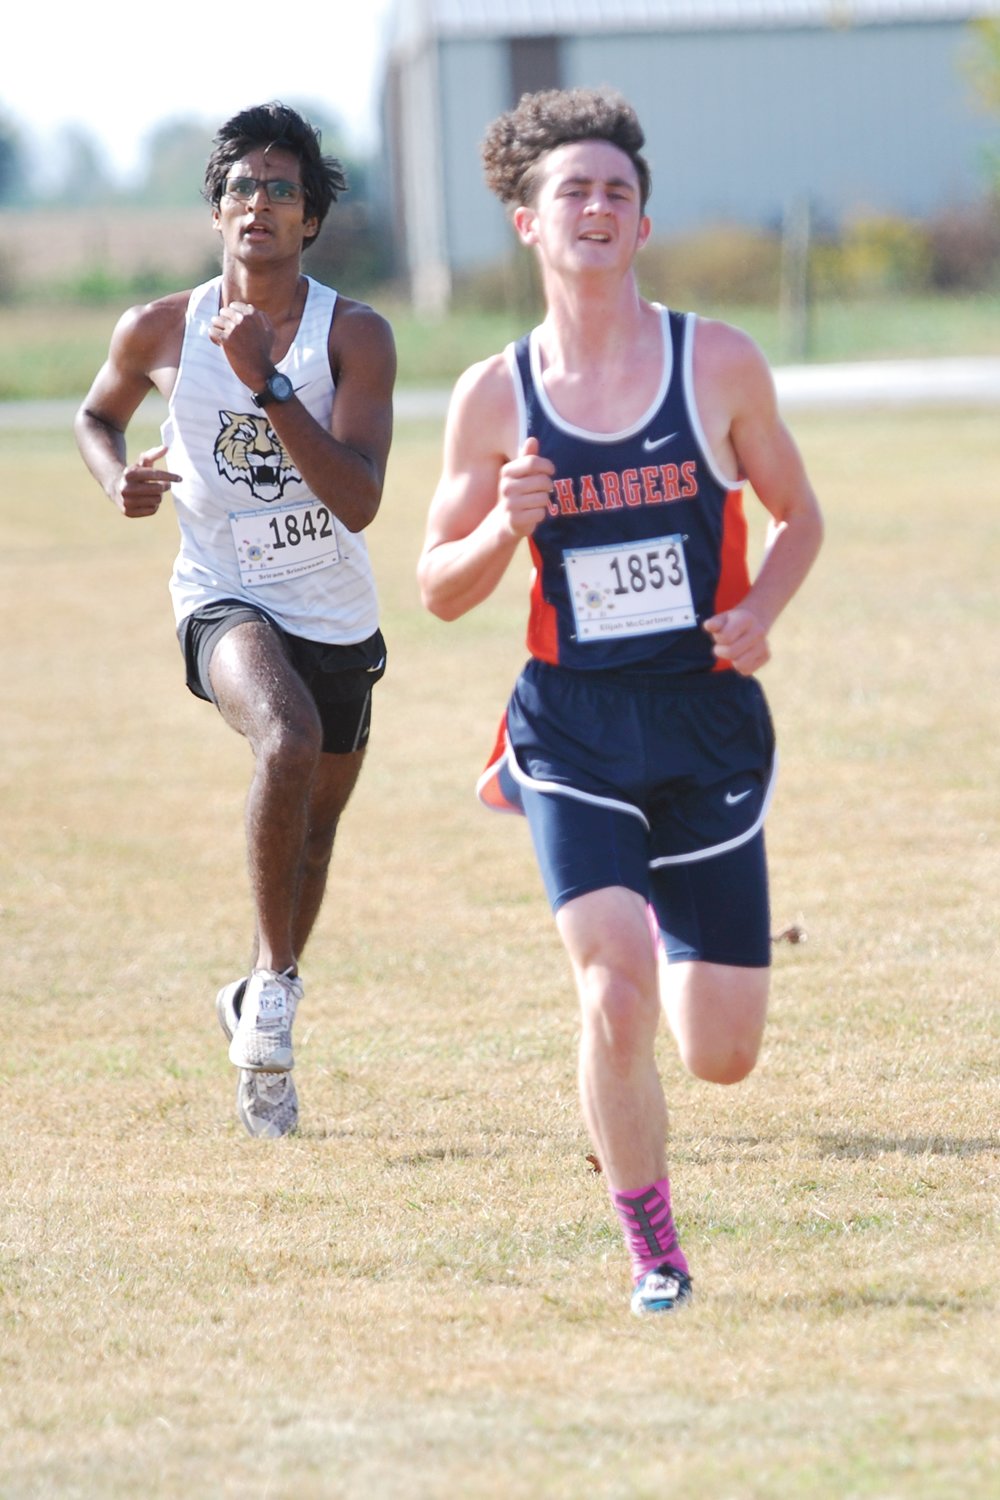 North Montgomery's Elijah McCartney cruised to a first-team all-conference selection with a 9th place finish in a time of 17:54.